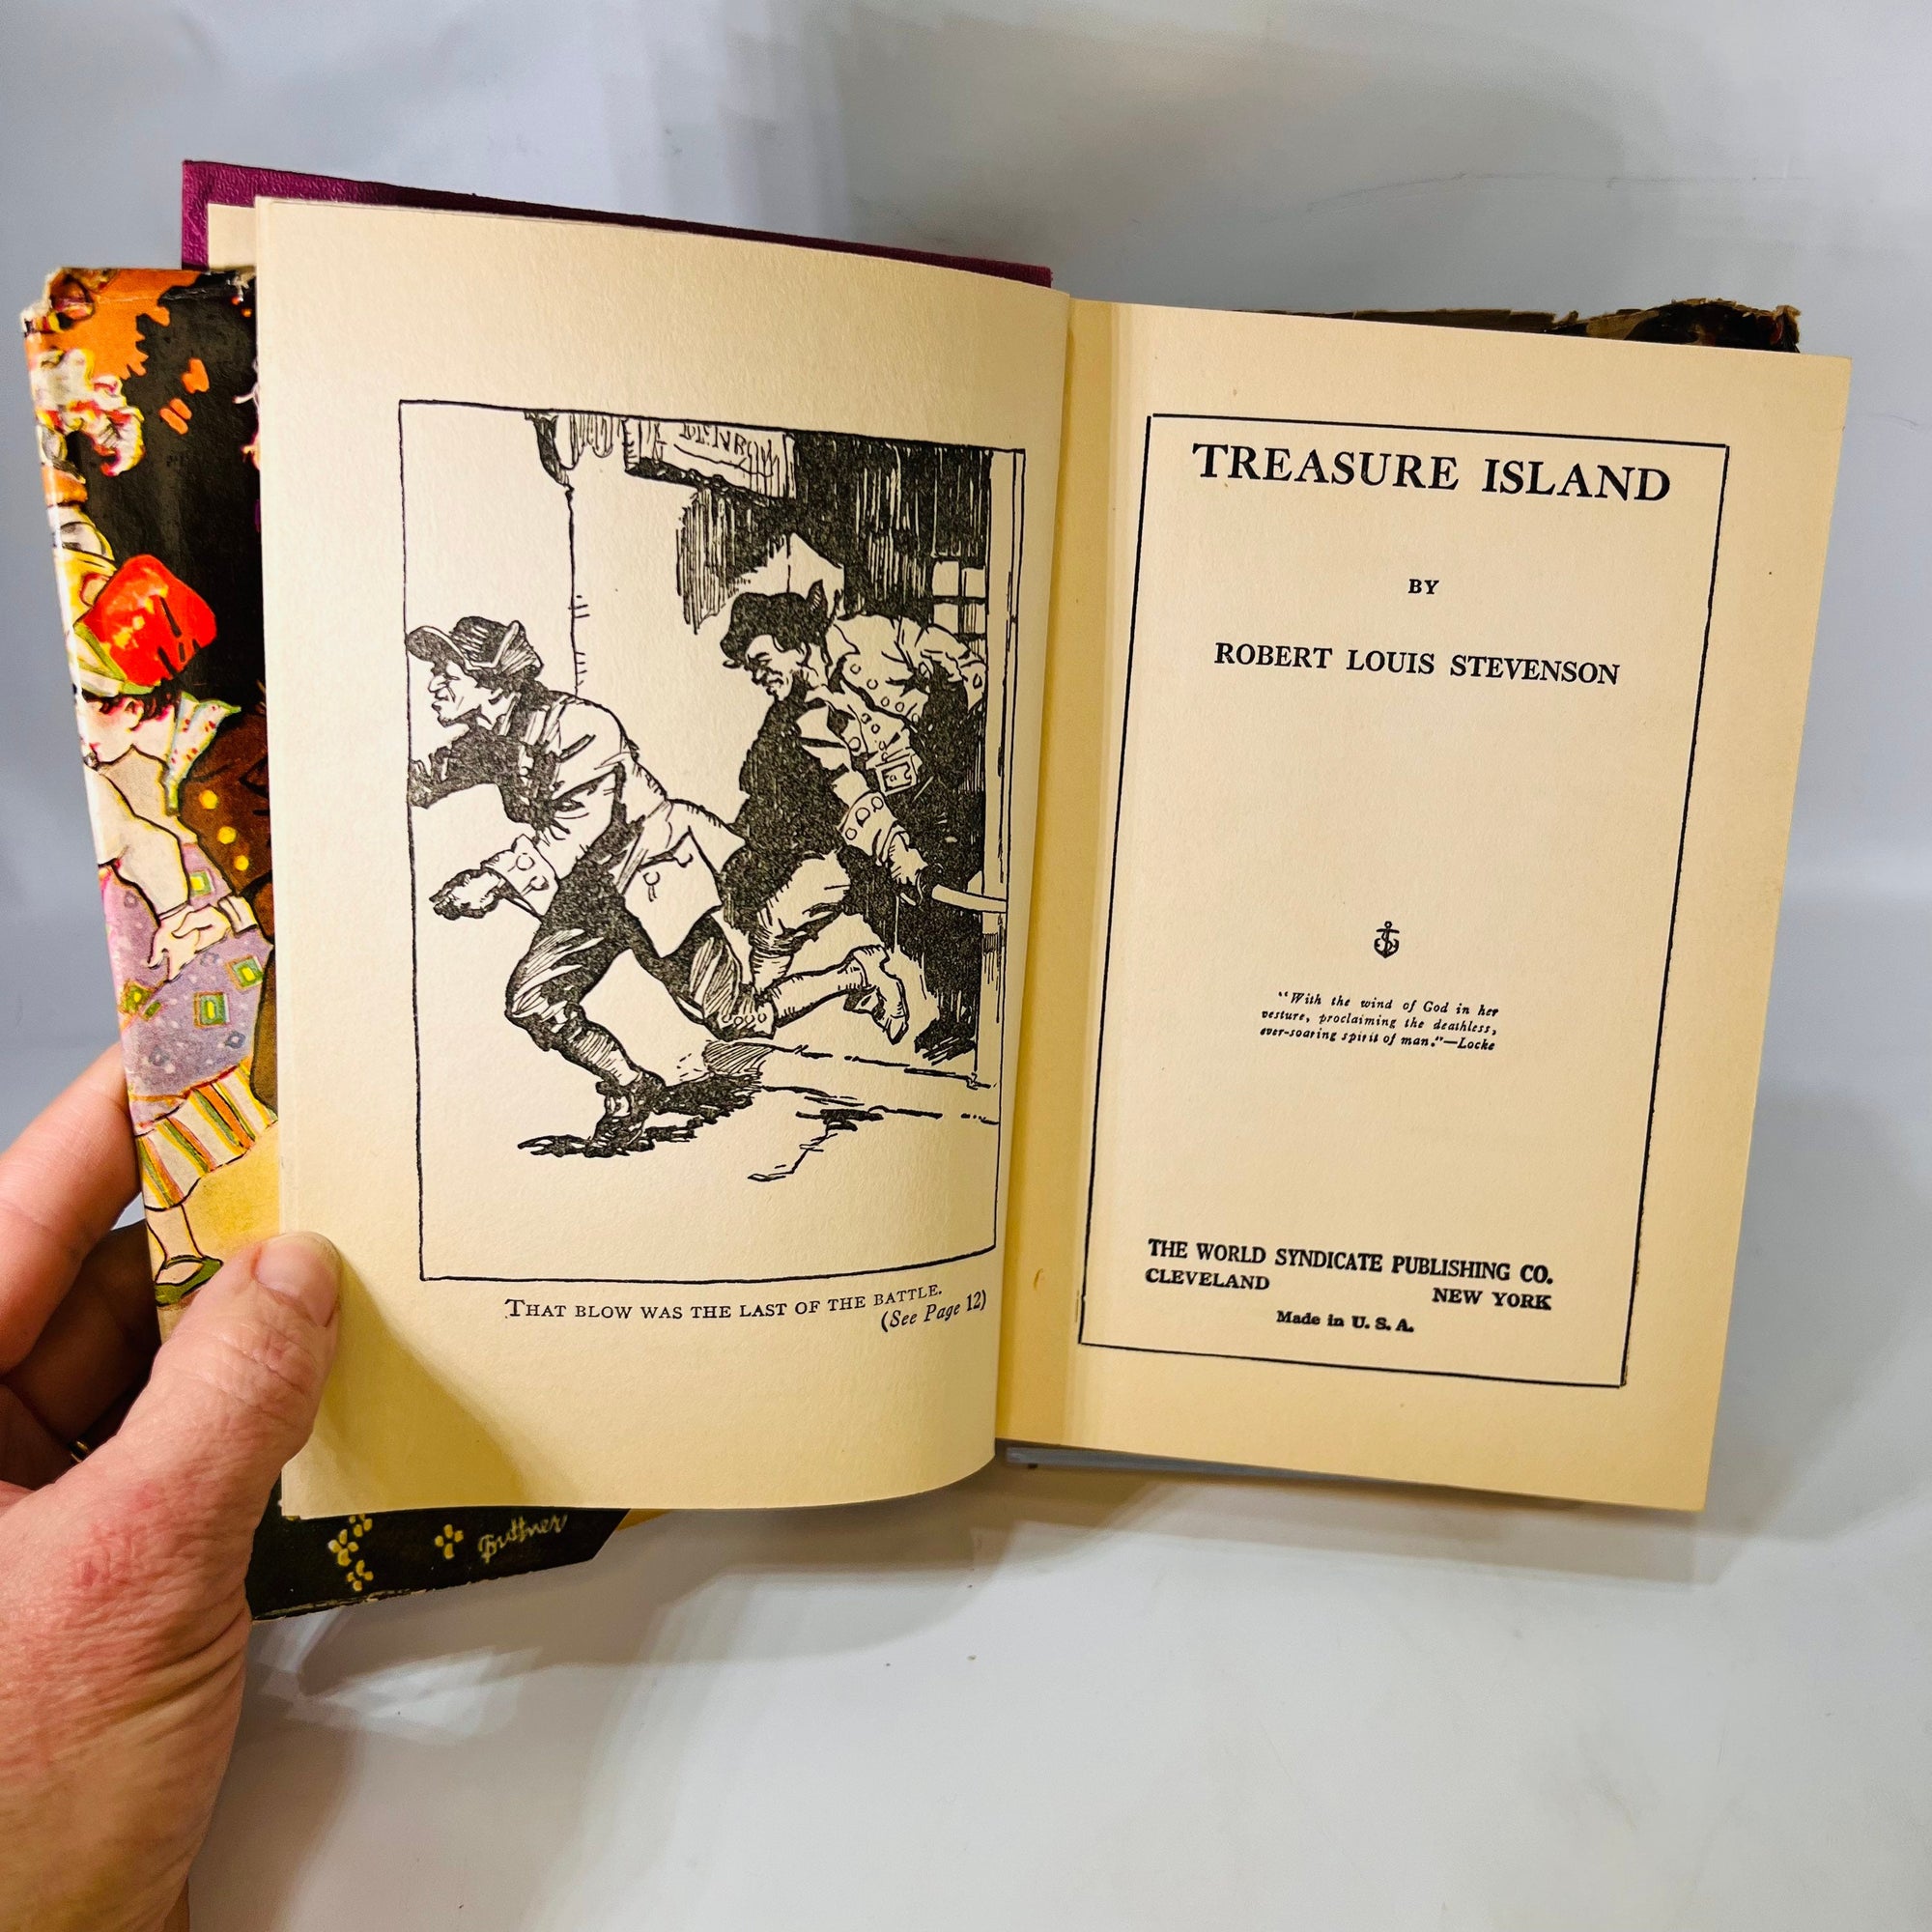 Treasure Island by Robert Lewis Stevenson The World Syndicate Publishing Co. Vintage Adventure Classic Book